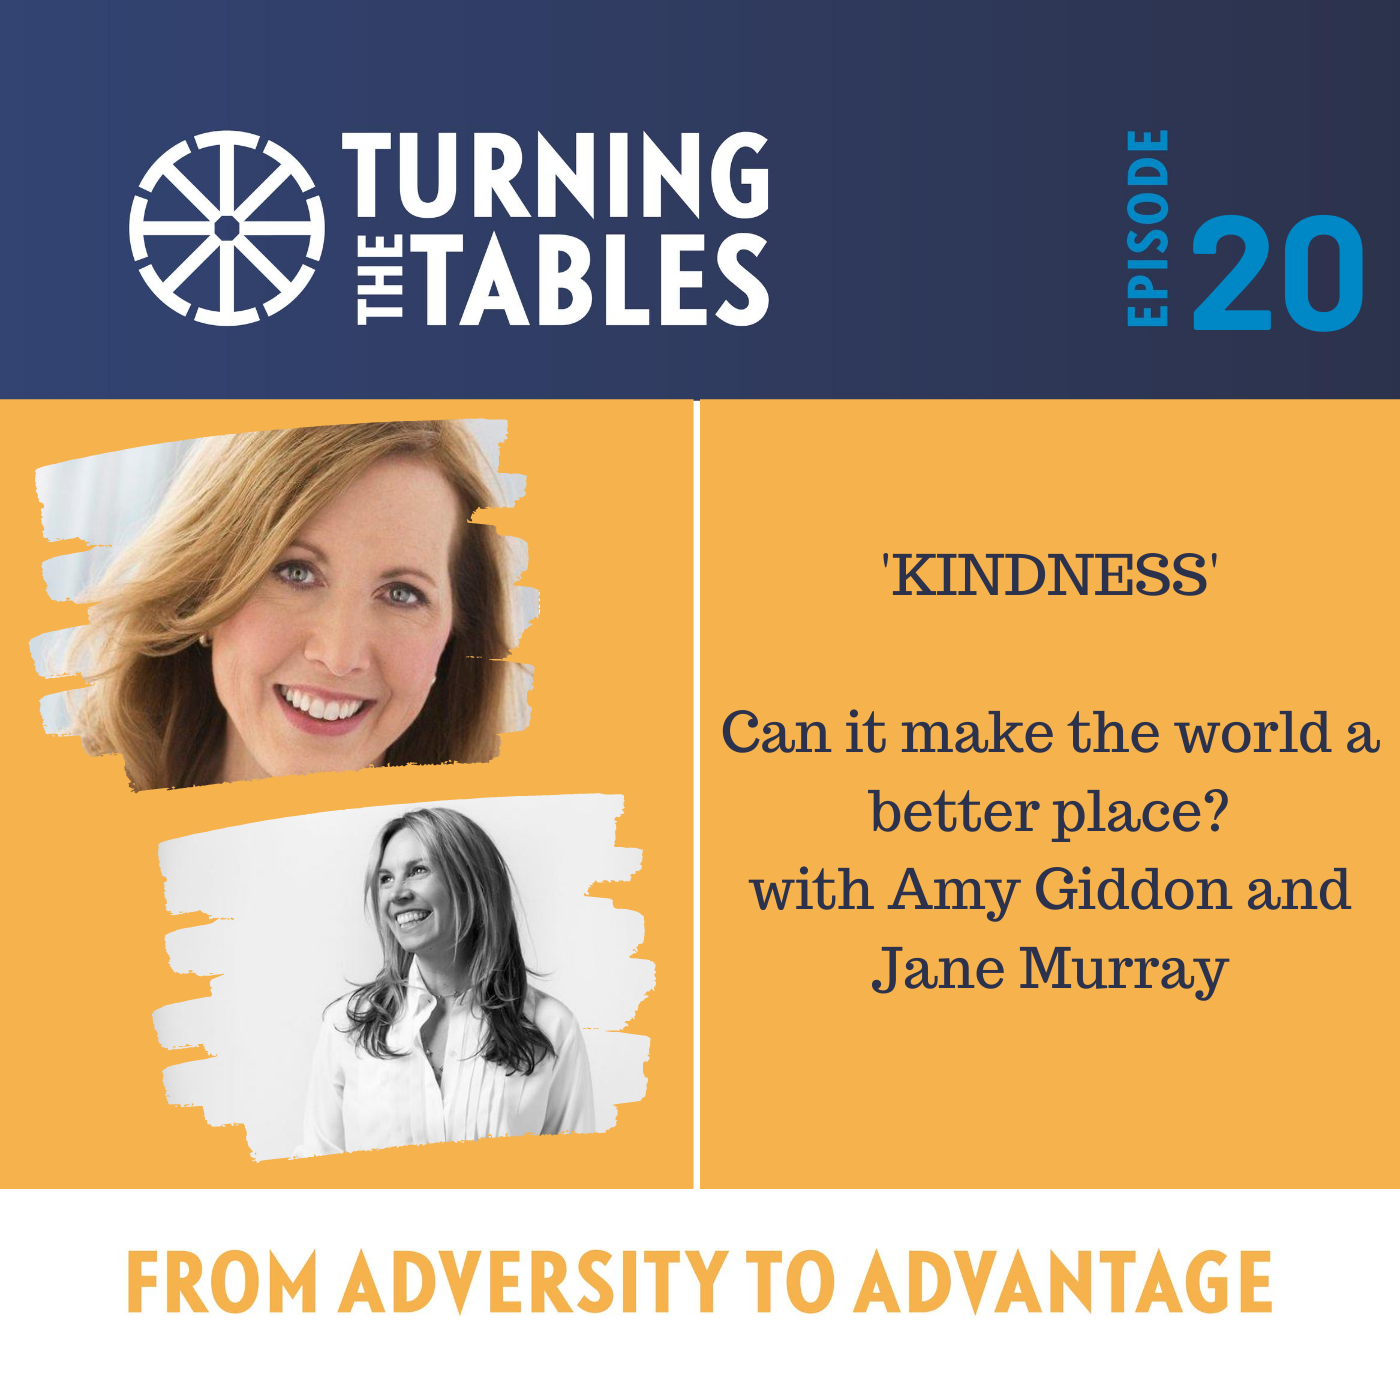 EP20: Kindness - Can it make the world a better place? with Amy Giddon and Jane Murray